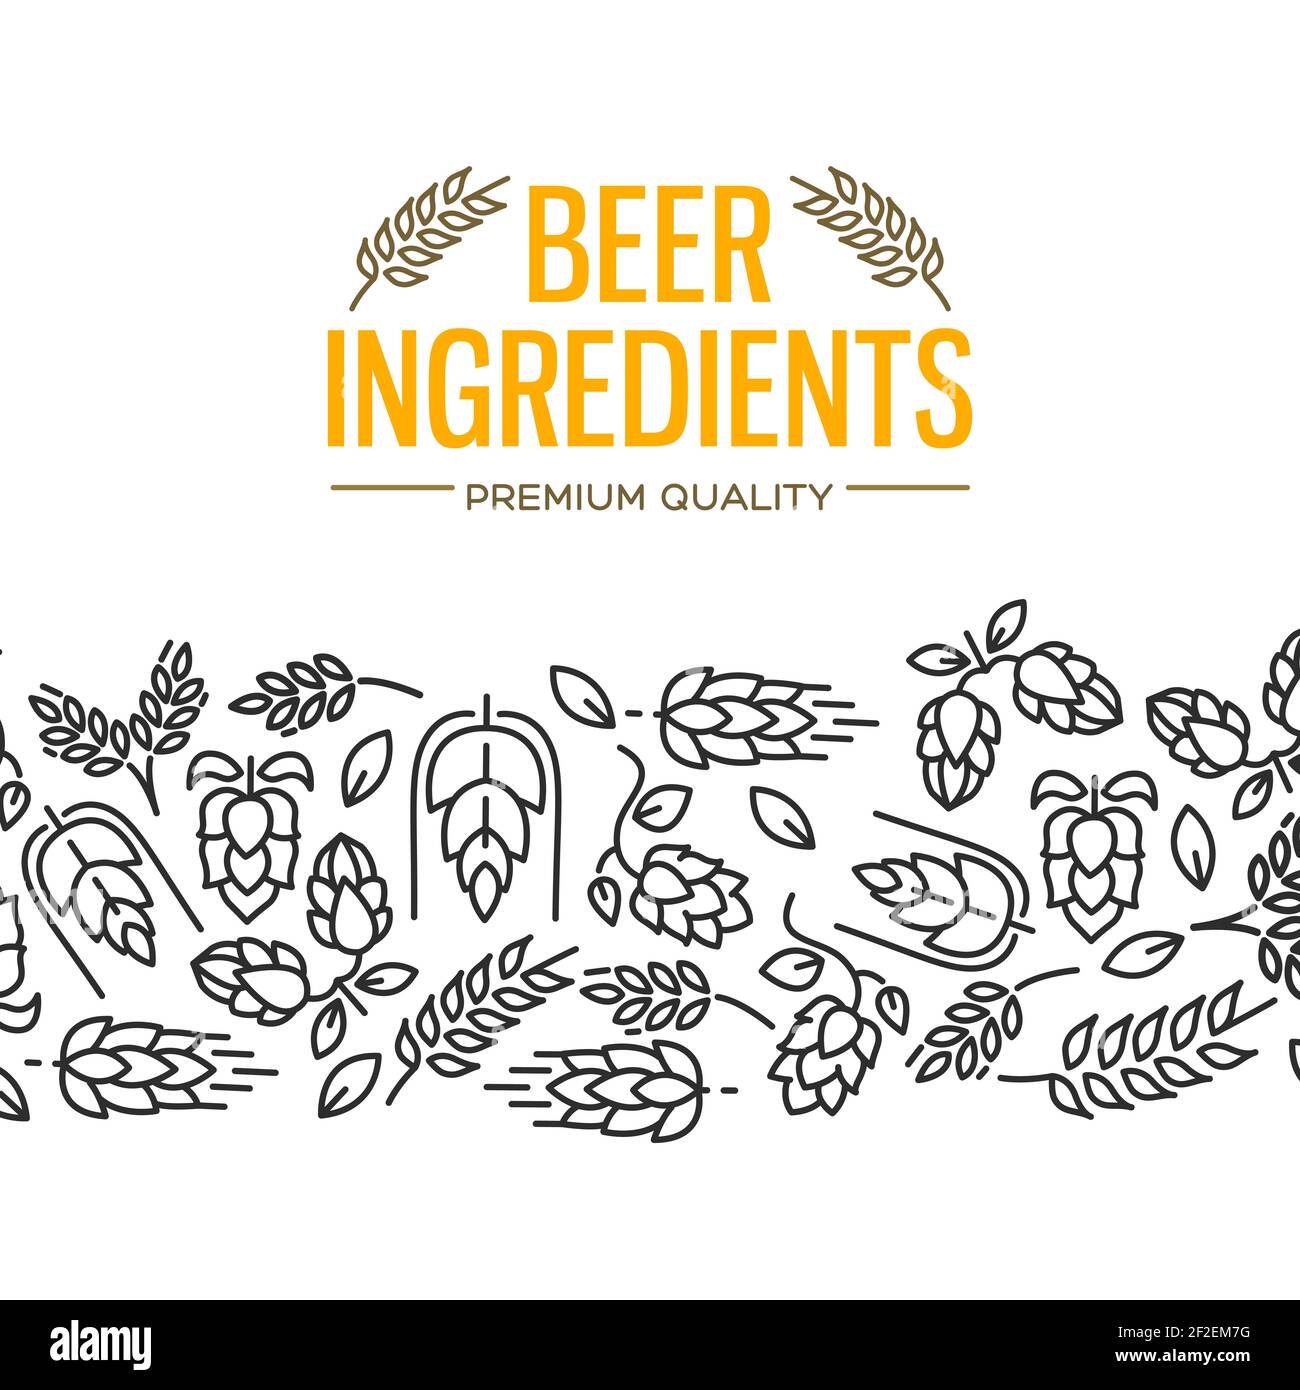 Beer ingredients design card with images under the yellow text and repeating of flowers, twig of hops, blossom, malt vector illustration Stock Vector